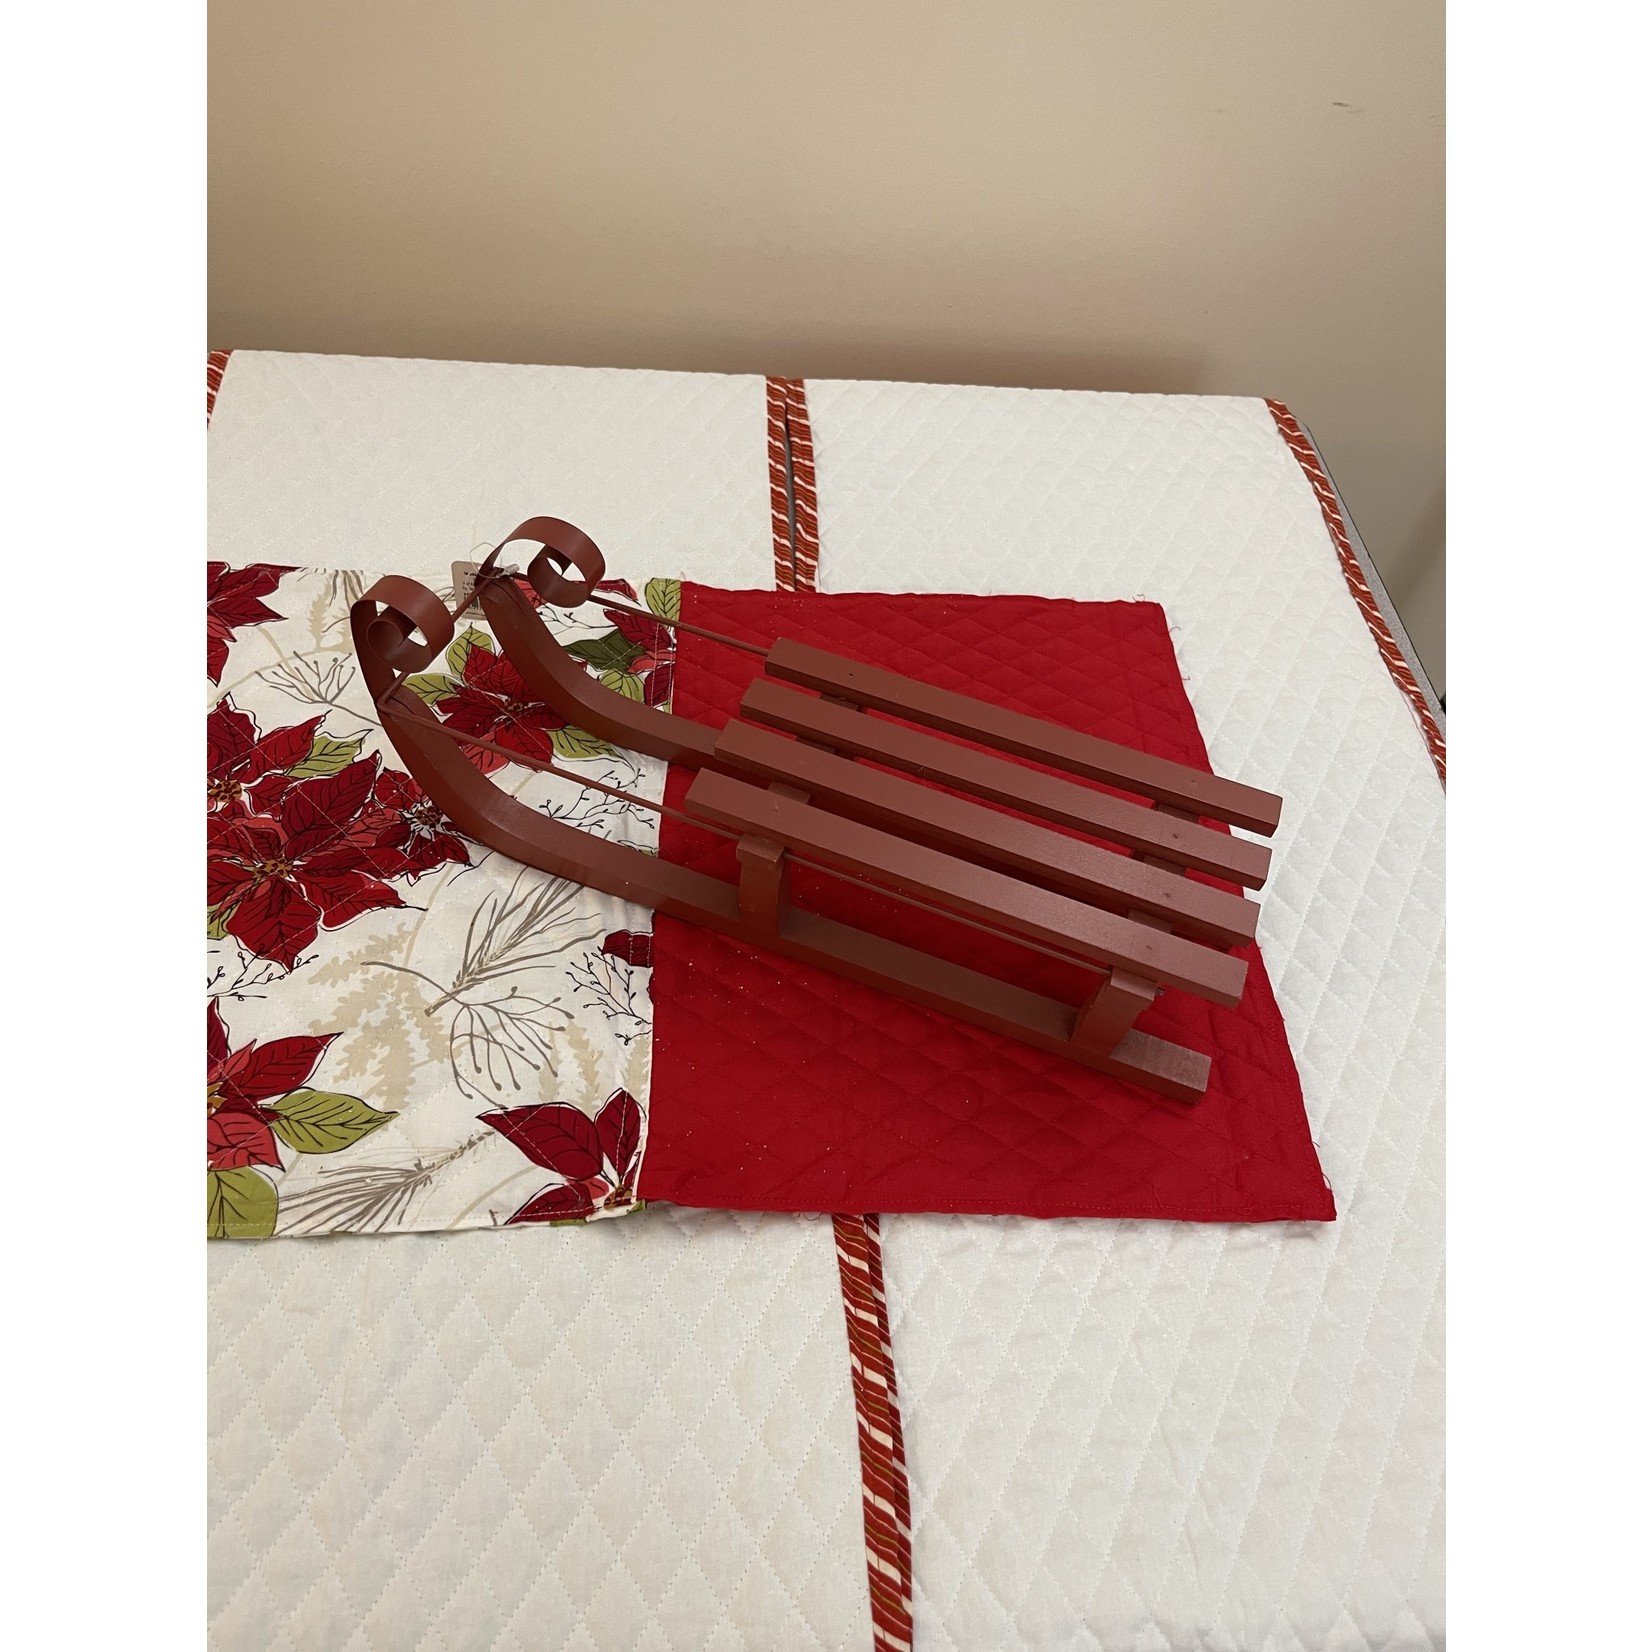 Taiwan Imports Red Sled - 5"x16"x4.5" h